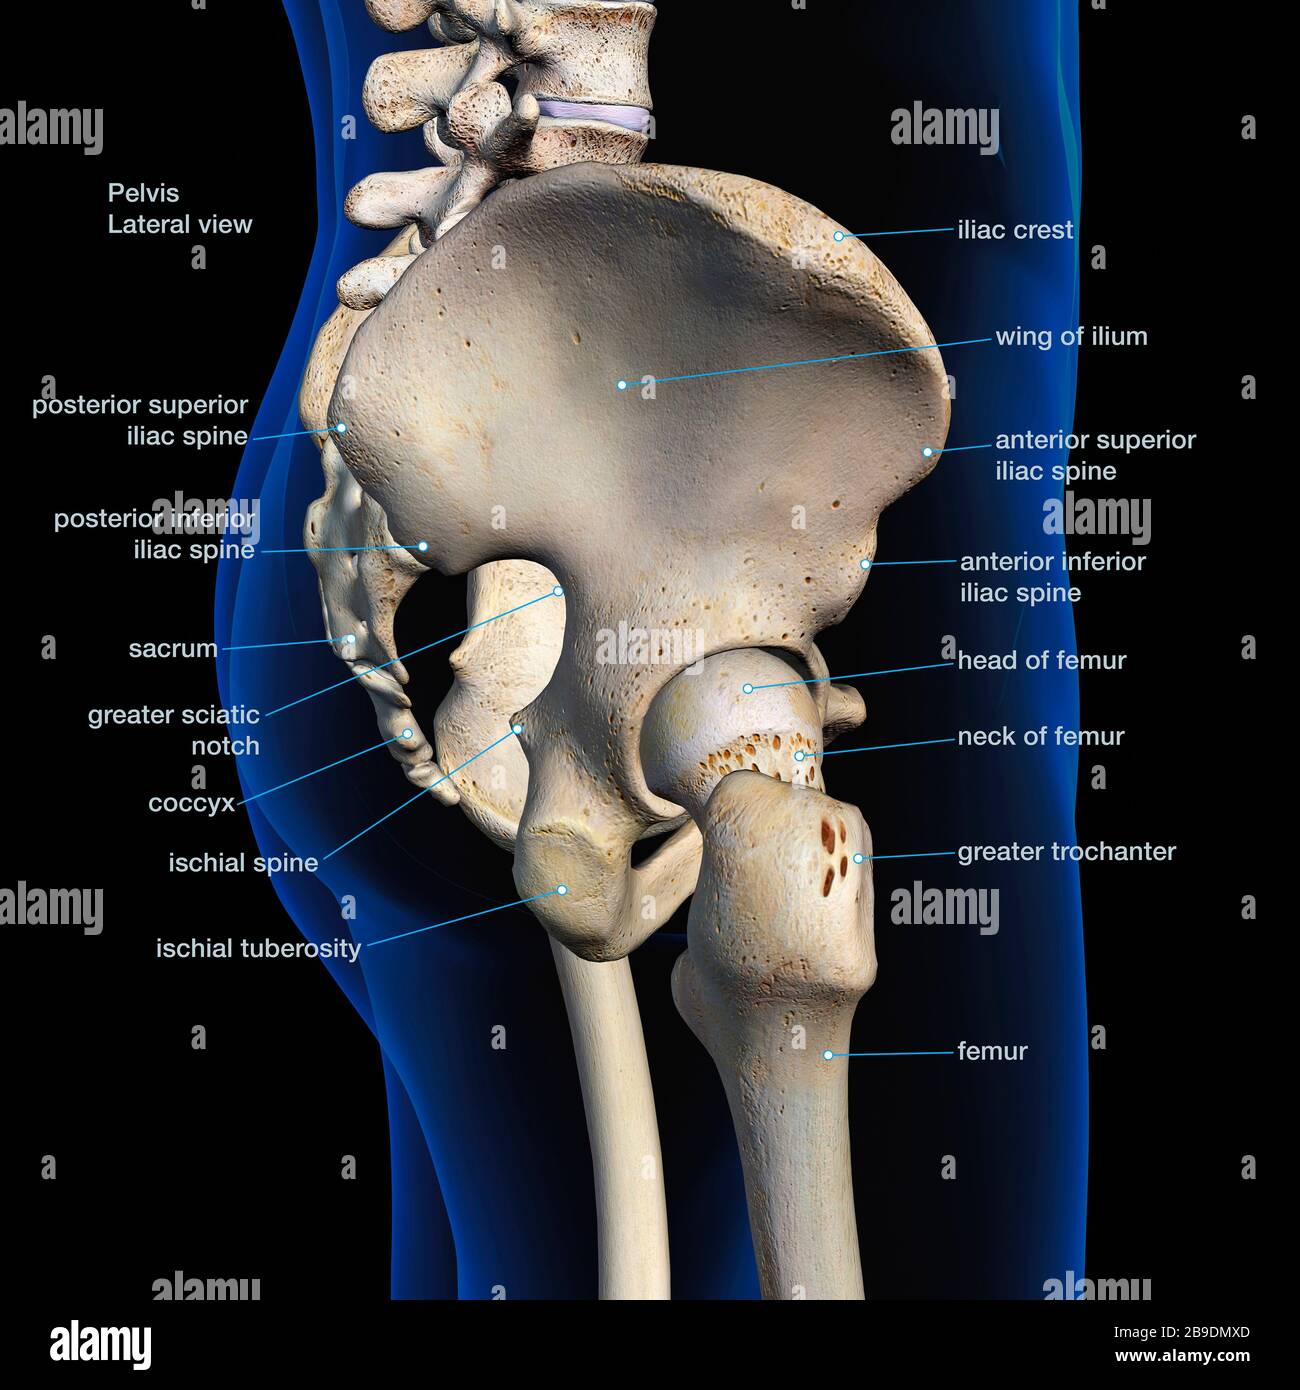 Lateral View Of Male Pelvis Hip And Leg Bones Labeled On A Black